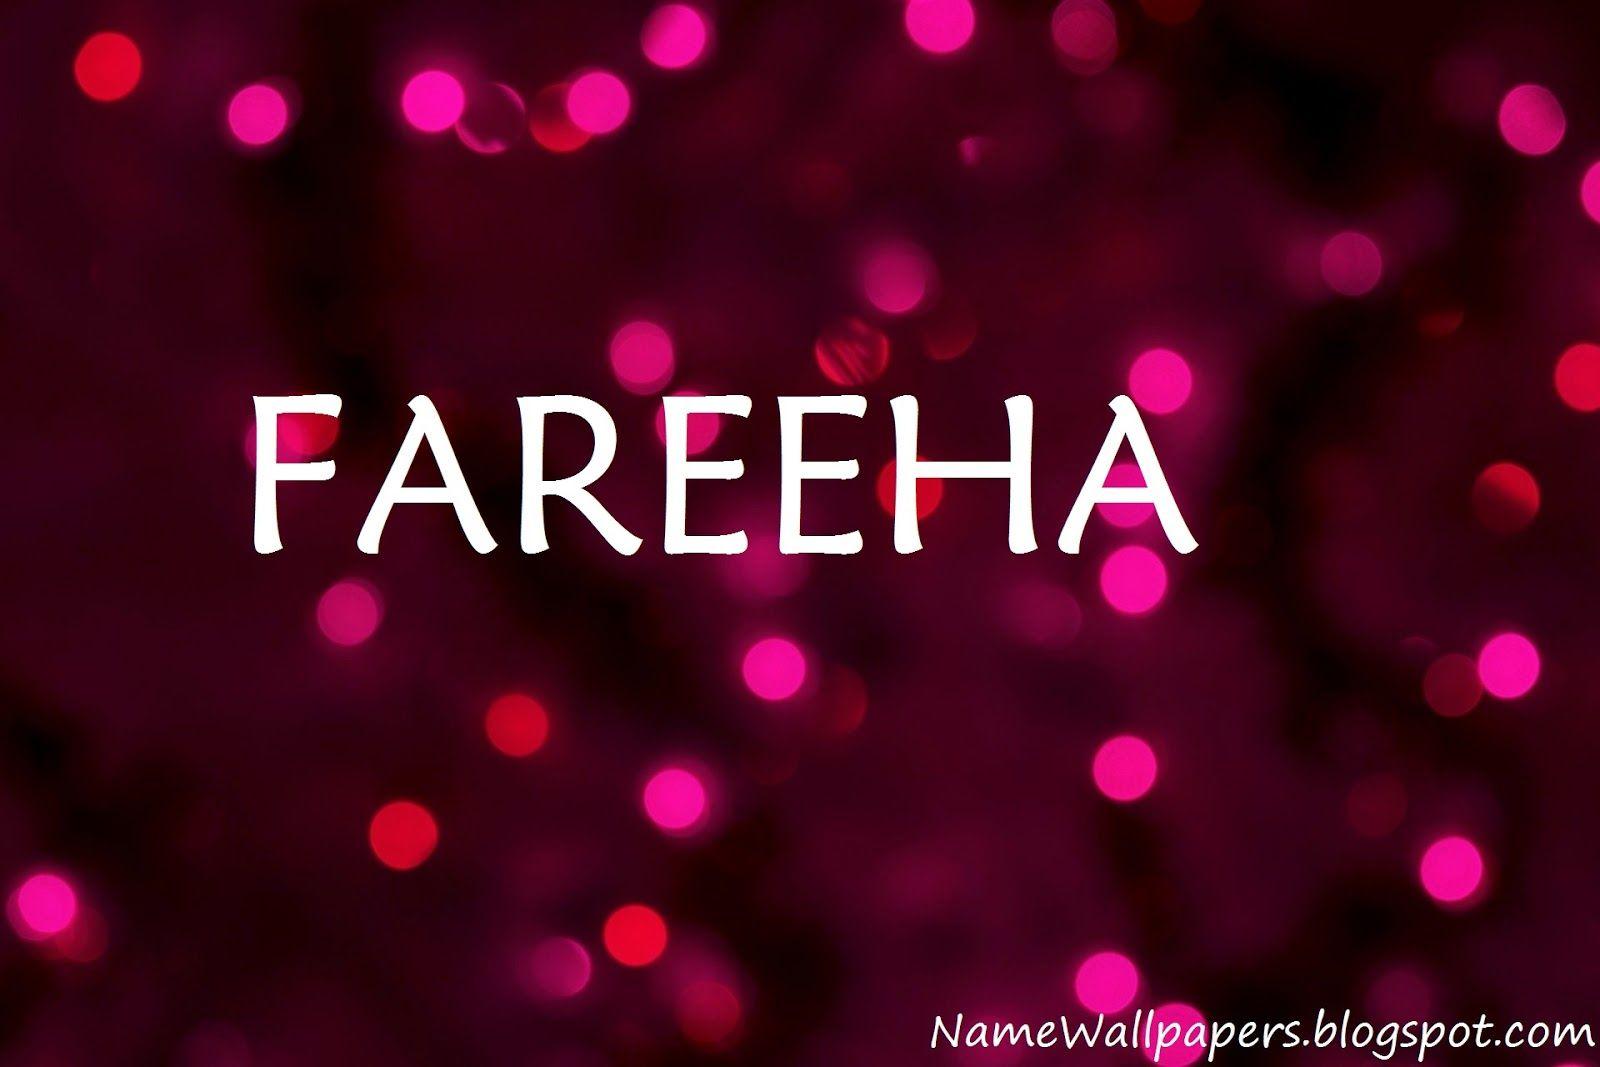 Fareeha Name Wallpaper Fareeha Name Wallpaper Urdu Name Meaning